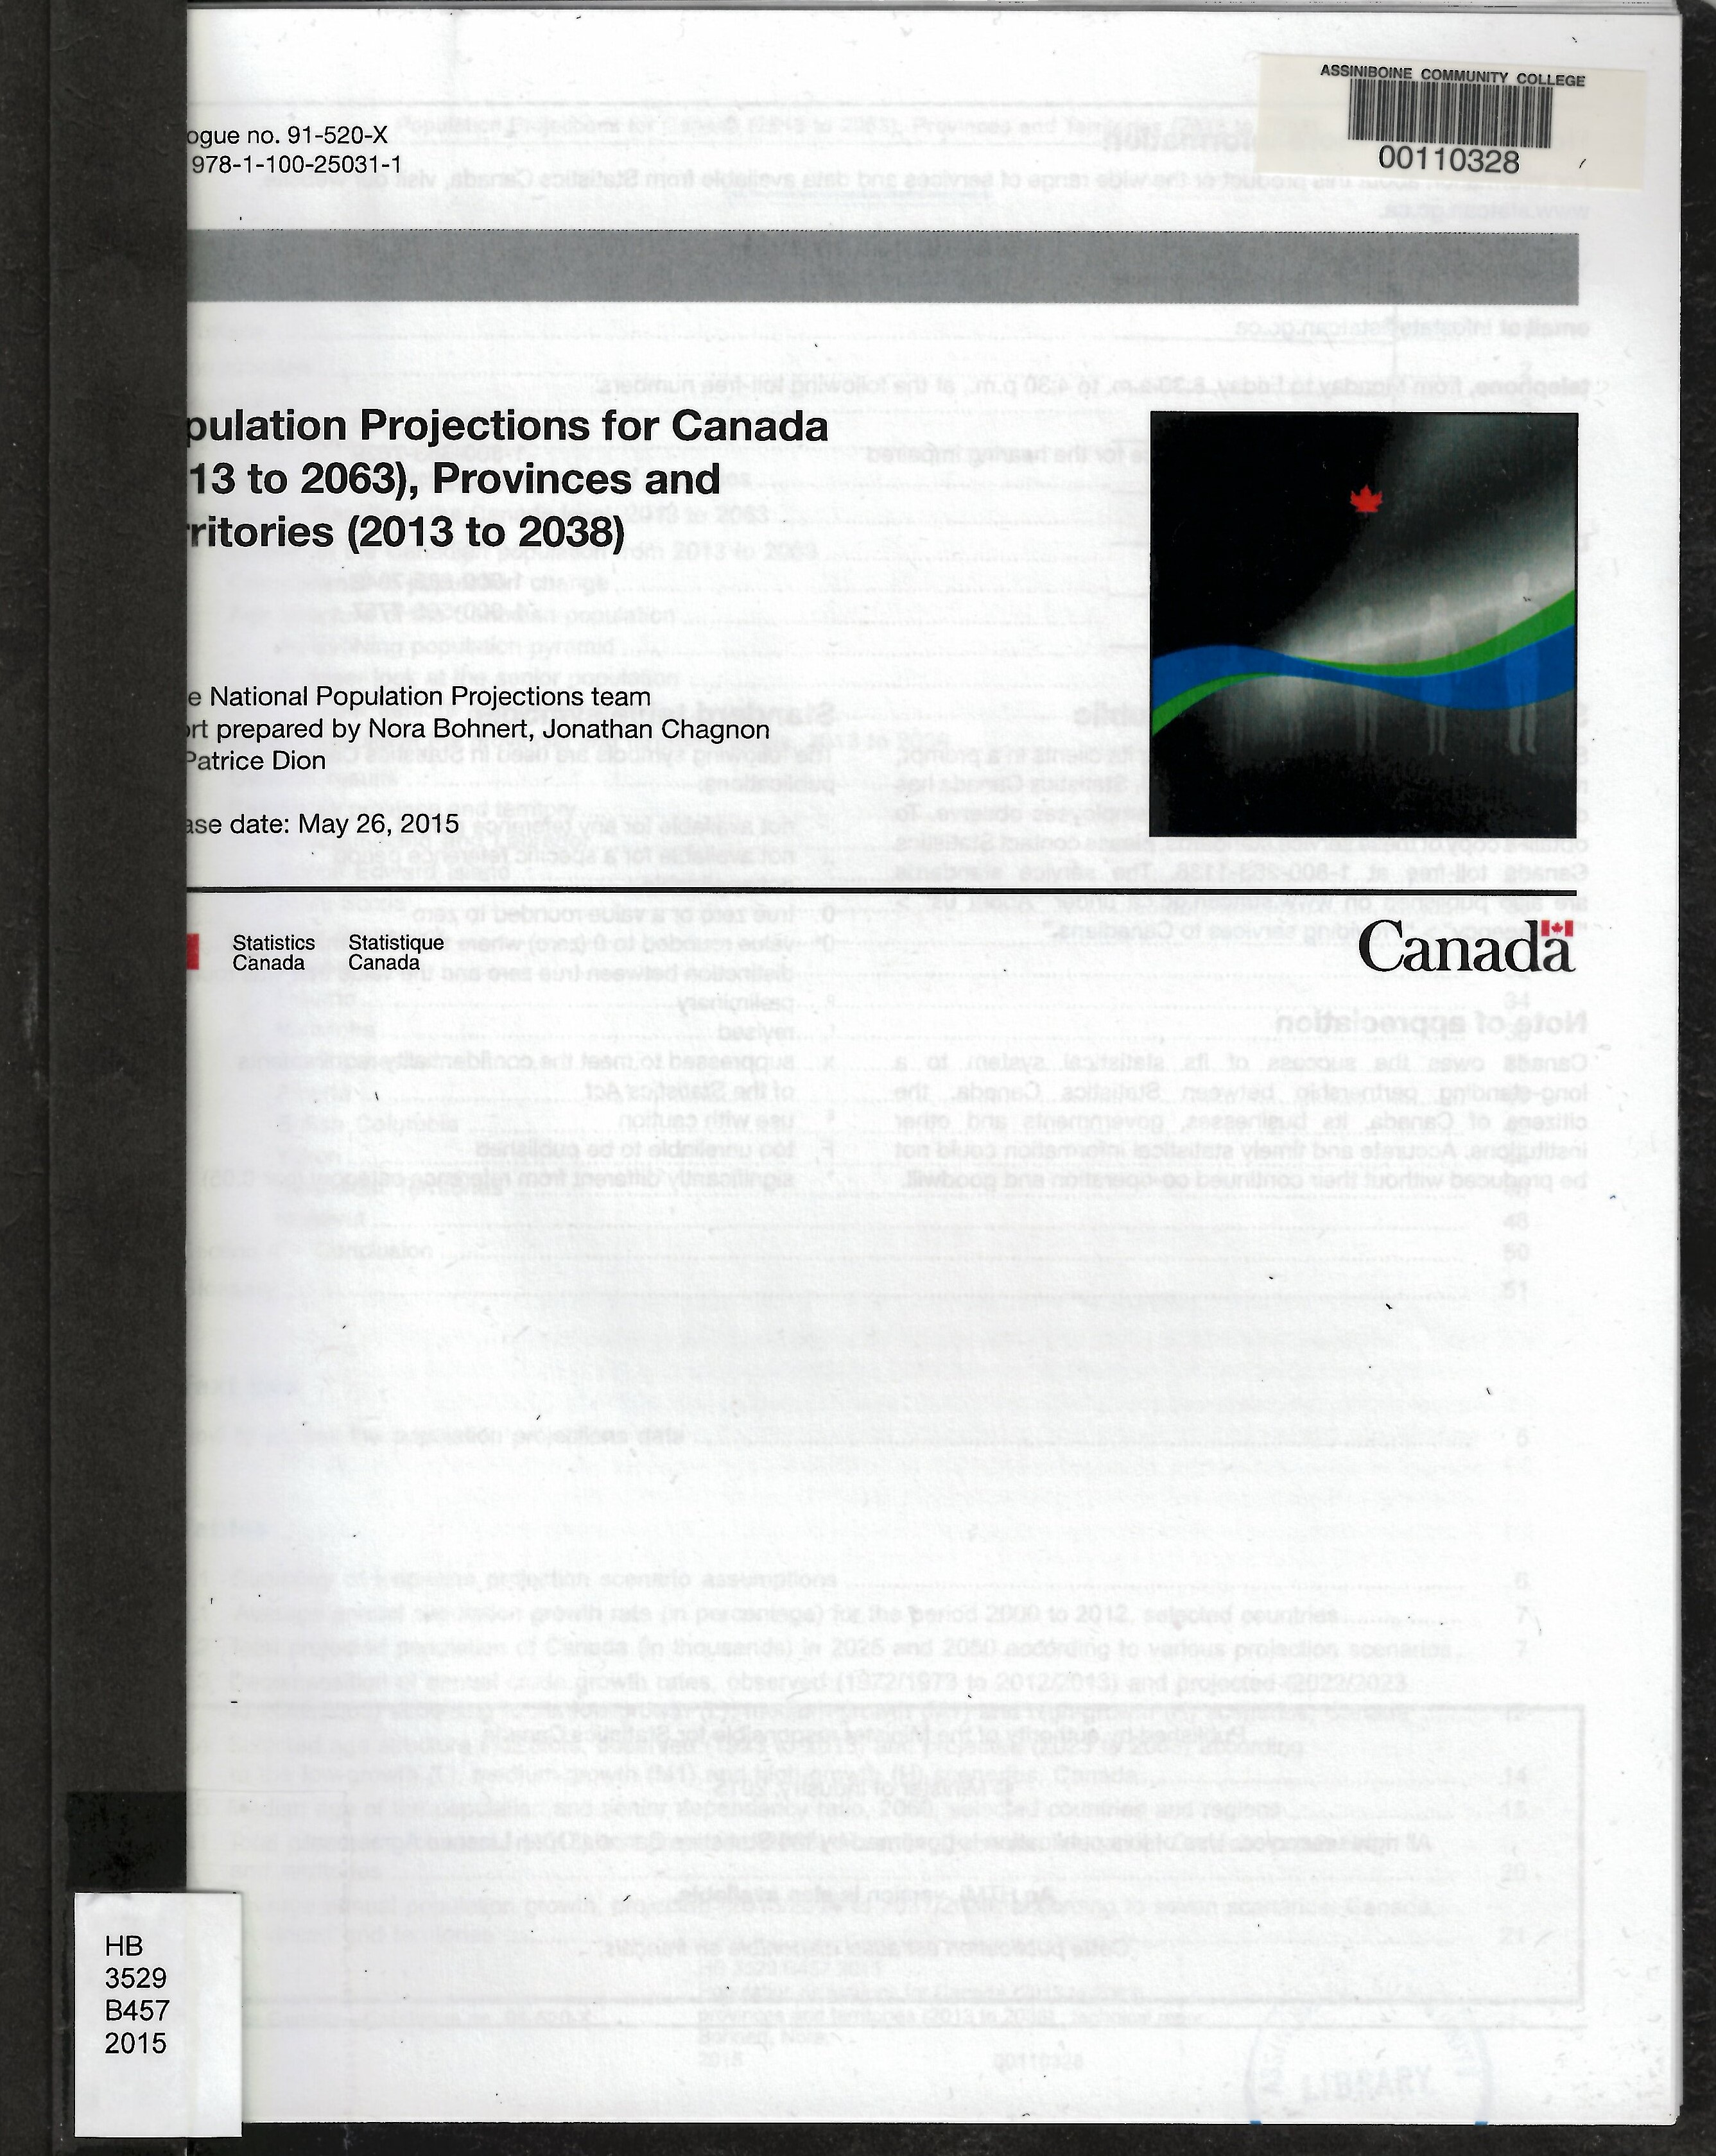 Population projections for Canada (2013 to 2063), provinces and territories (2013 to 2038) : technical report on methodology and assumptions